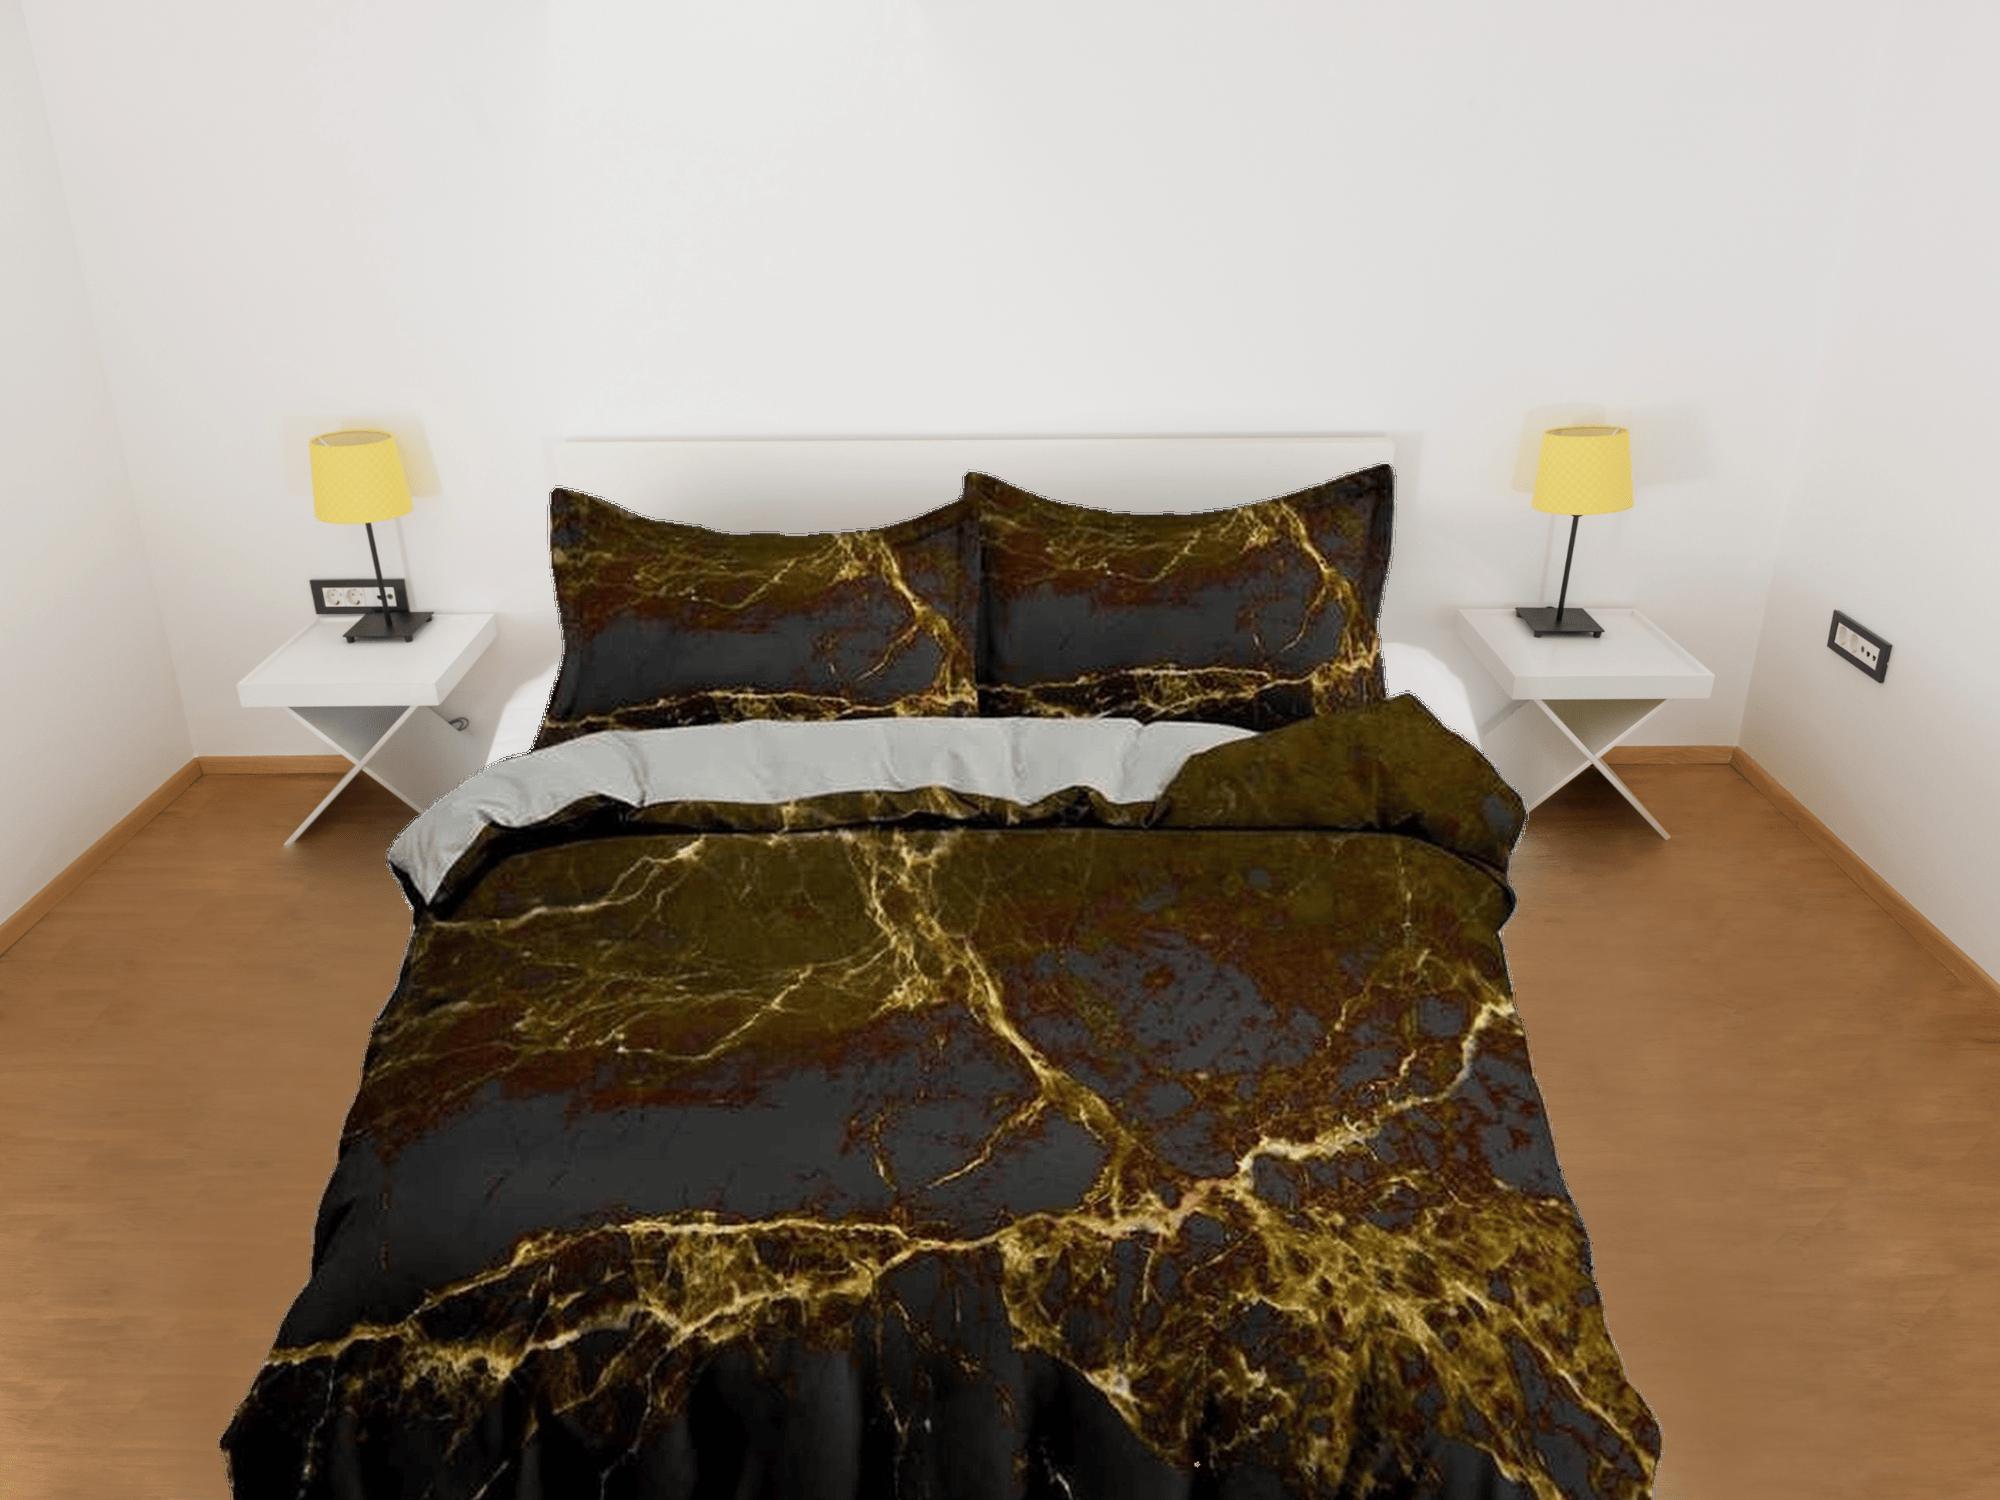 daintyduvet Contemporary bedroom set rustic aesthetic duvet cover, luxury gold alcohol ink abstract art room decor boho chic bedding set full king queen